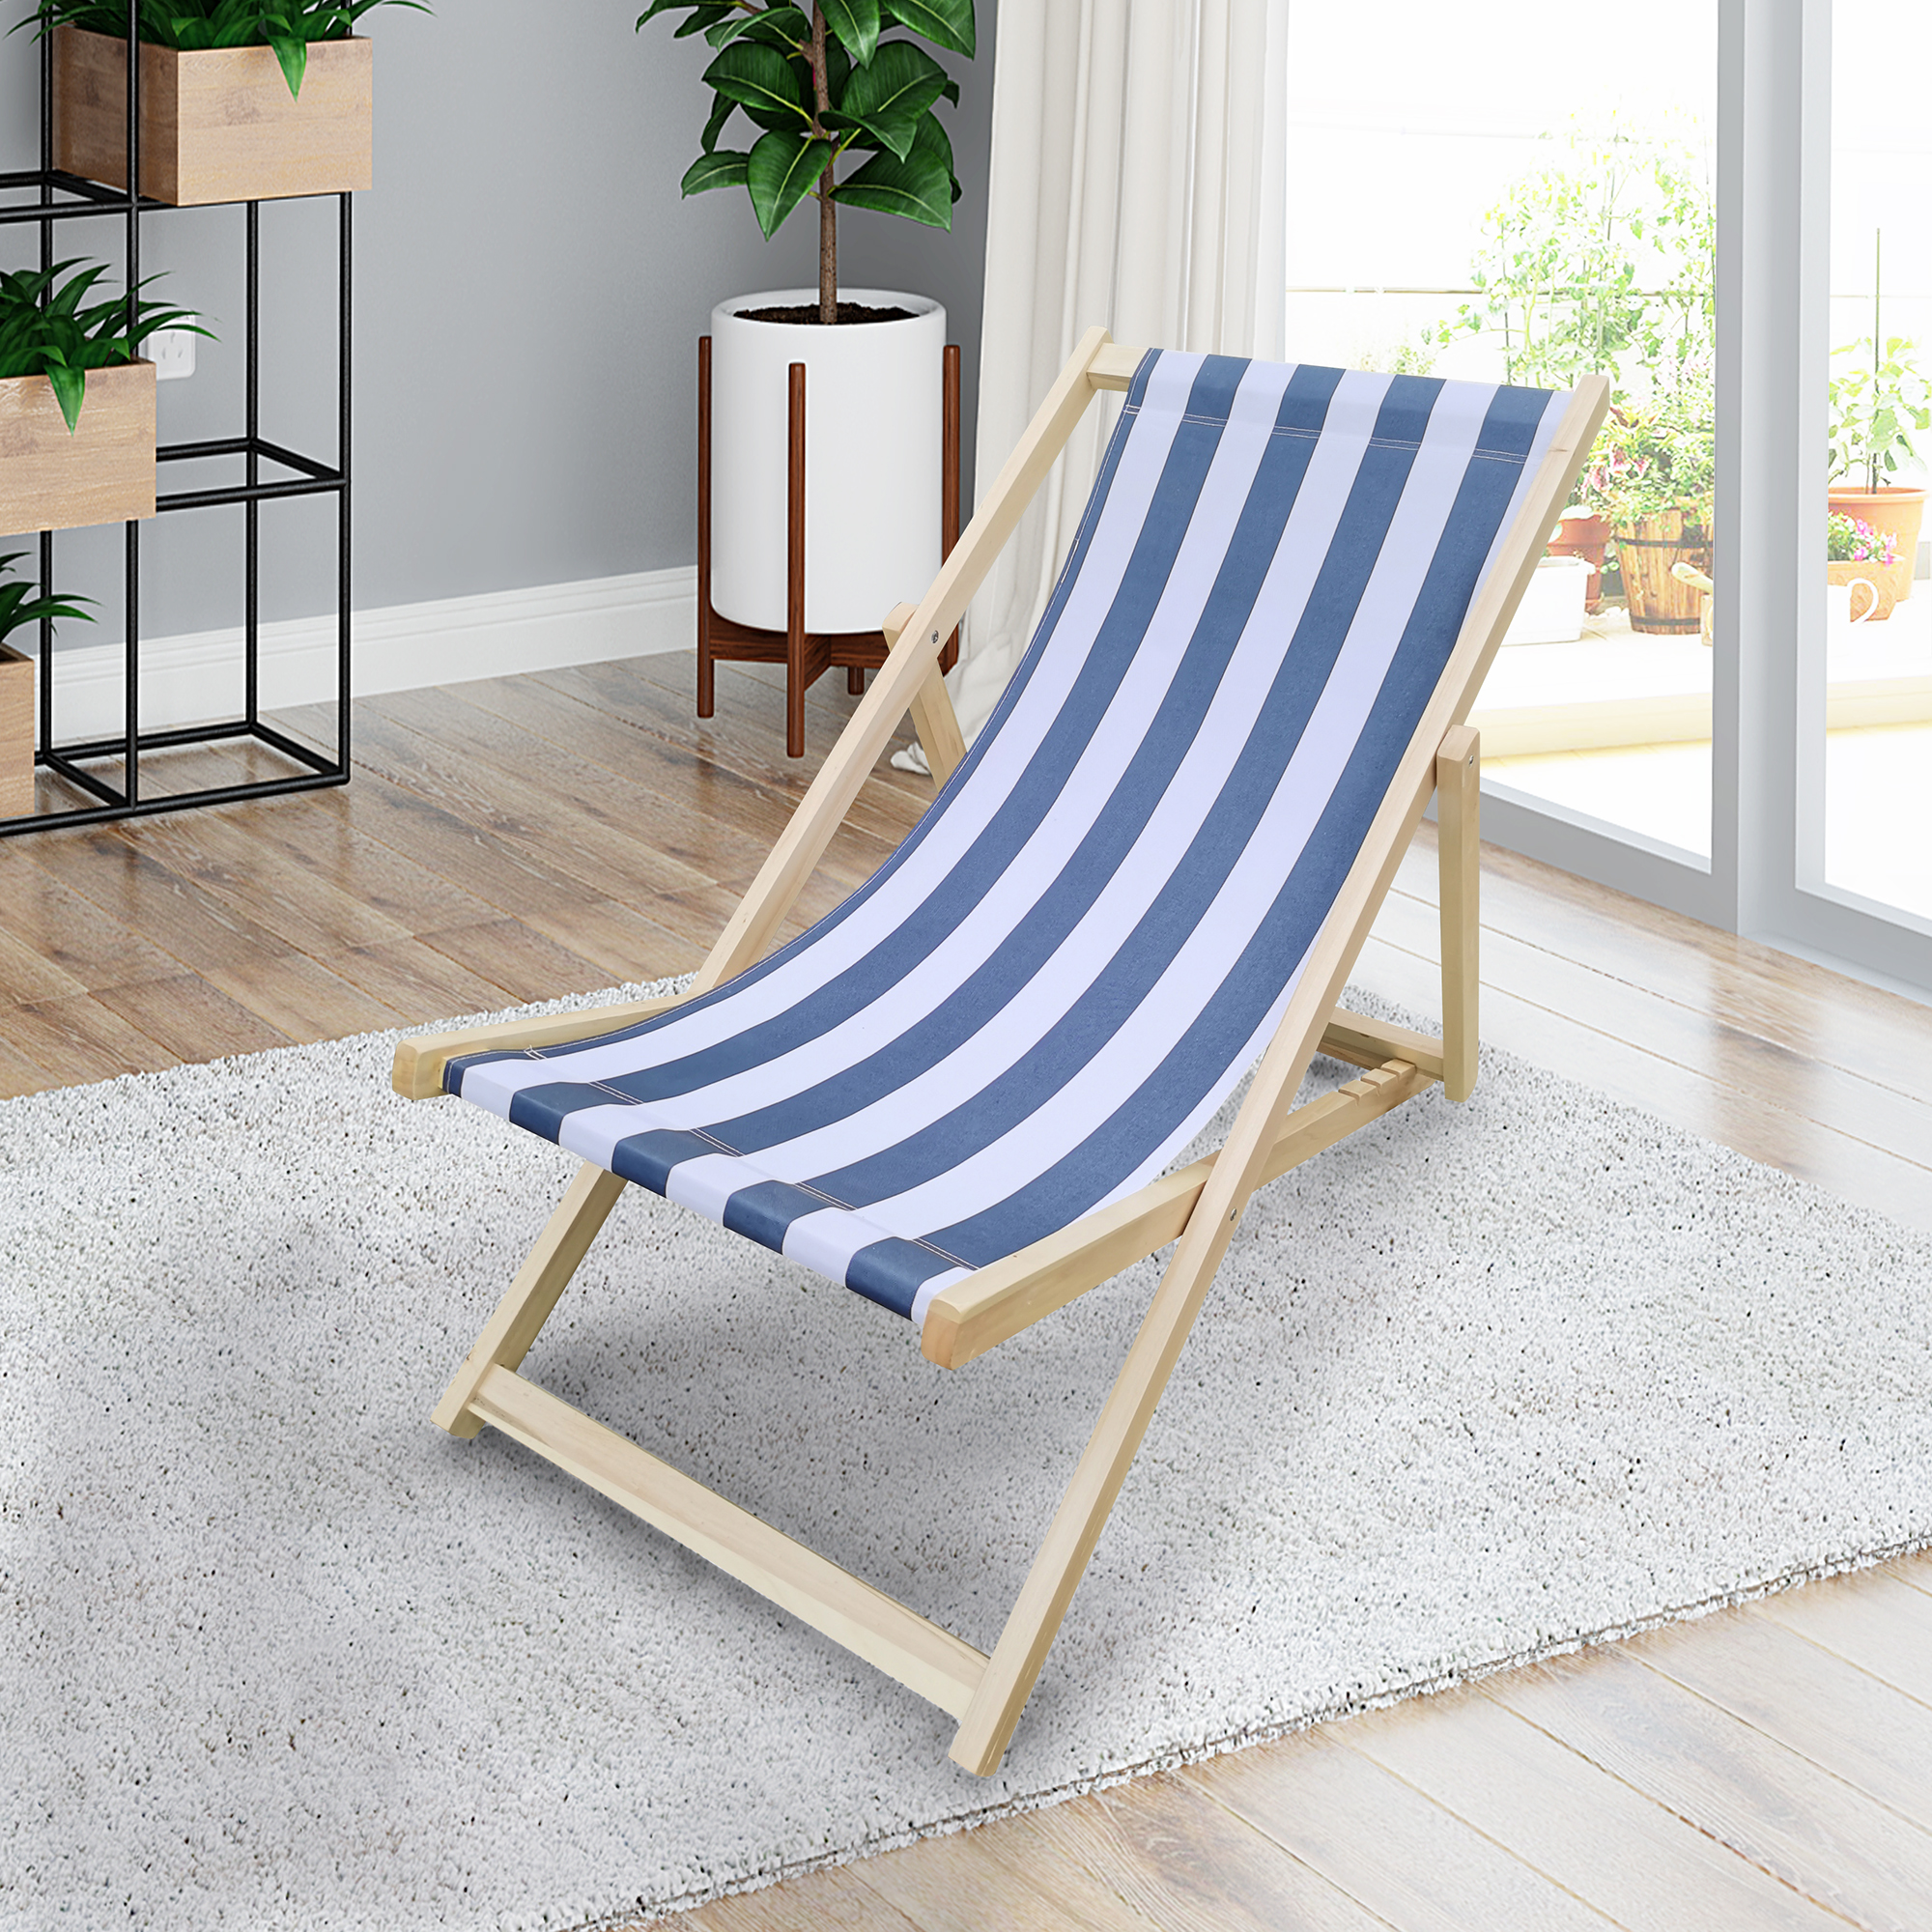 Outdoor Foldable Patio Lounge Chair, Beach Sling Chair, Outdoor Reclining Beach Chair Wooden Folding Adjustable Frame Solid Eucalyptus Wood with Blue Stripe Polyester Canvas Portable - image 1 of 7